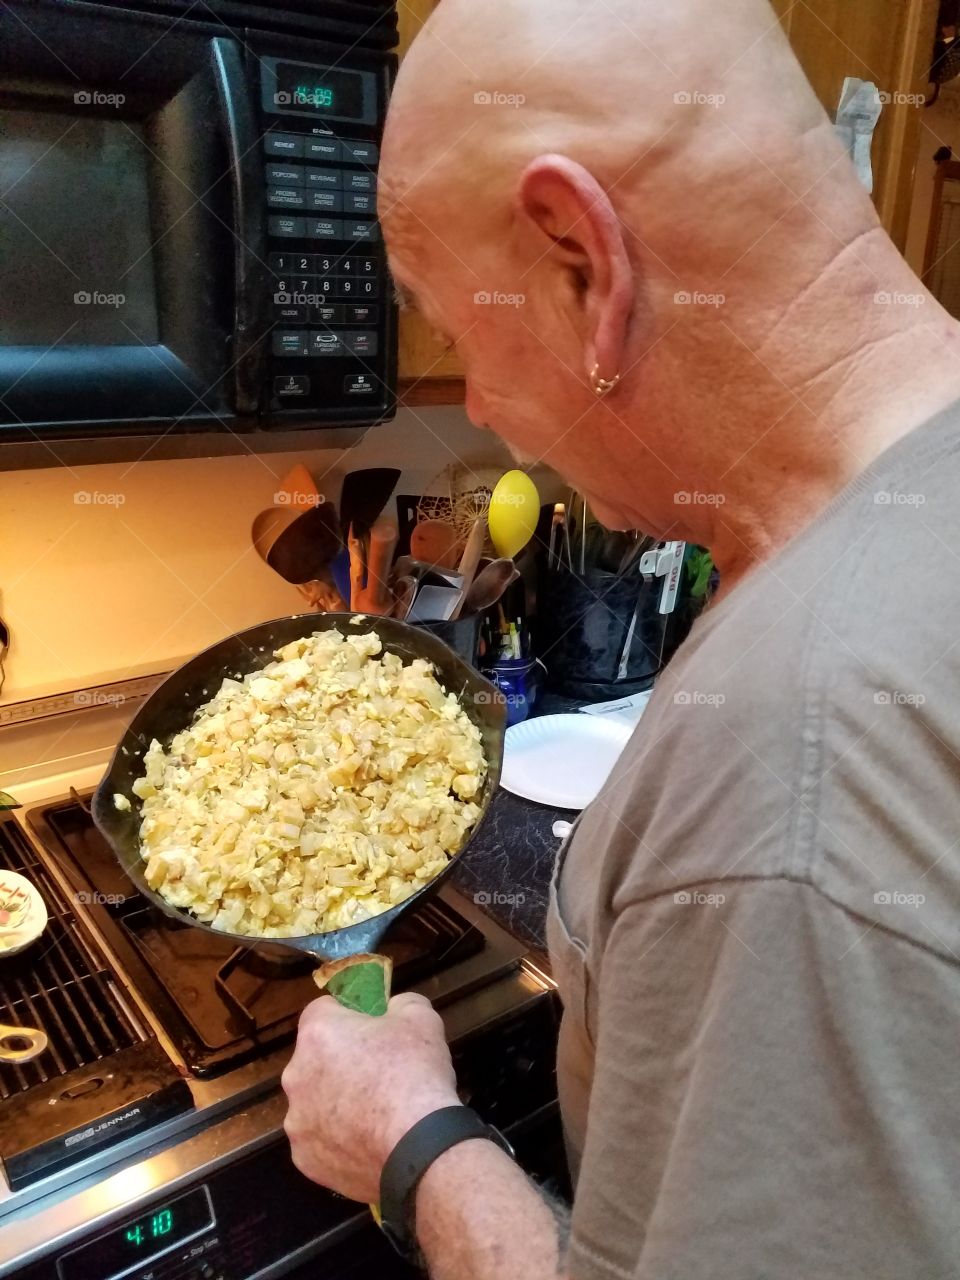 Made his Mothers recipe for potato & eggs. Iron skillet.